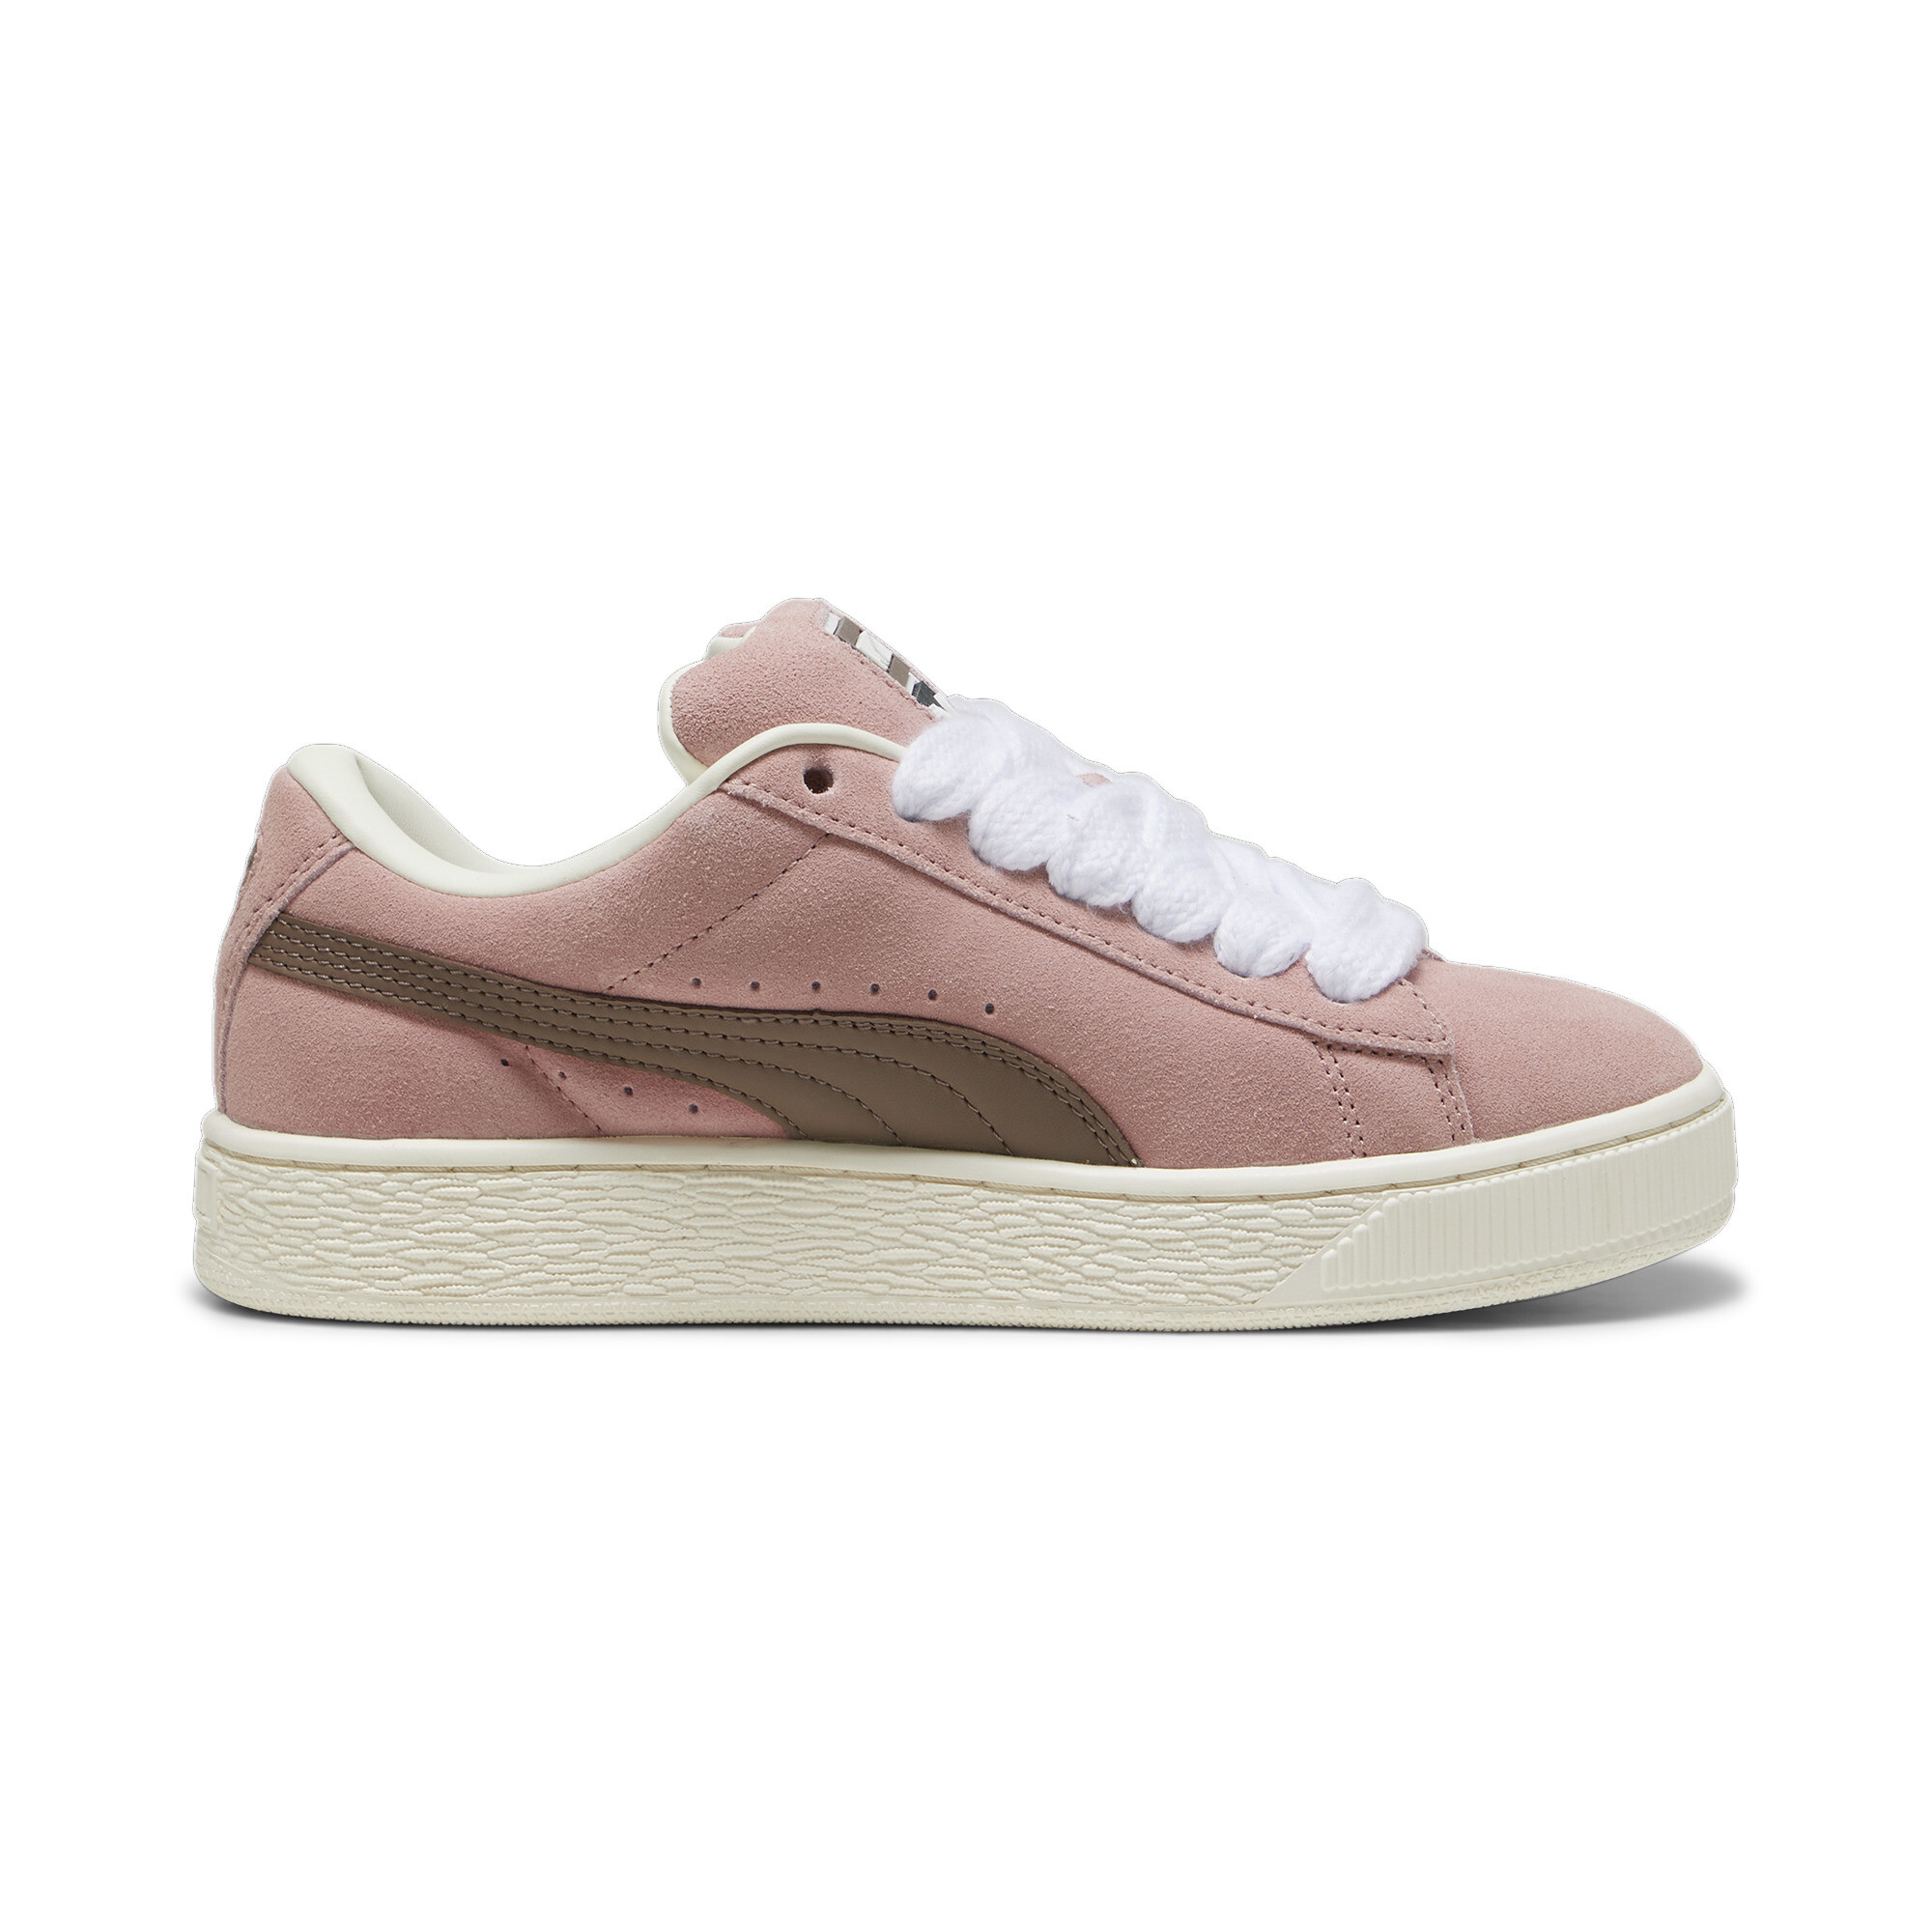 Puma Suede XL Sneakers Unisex, Pink, Size 40, Shoes